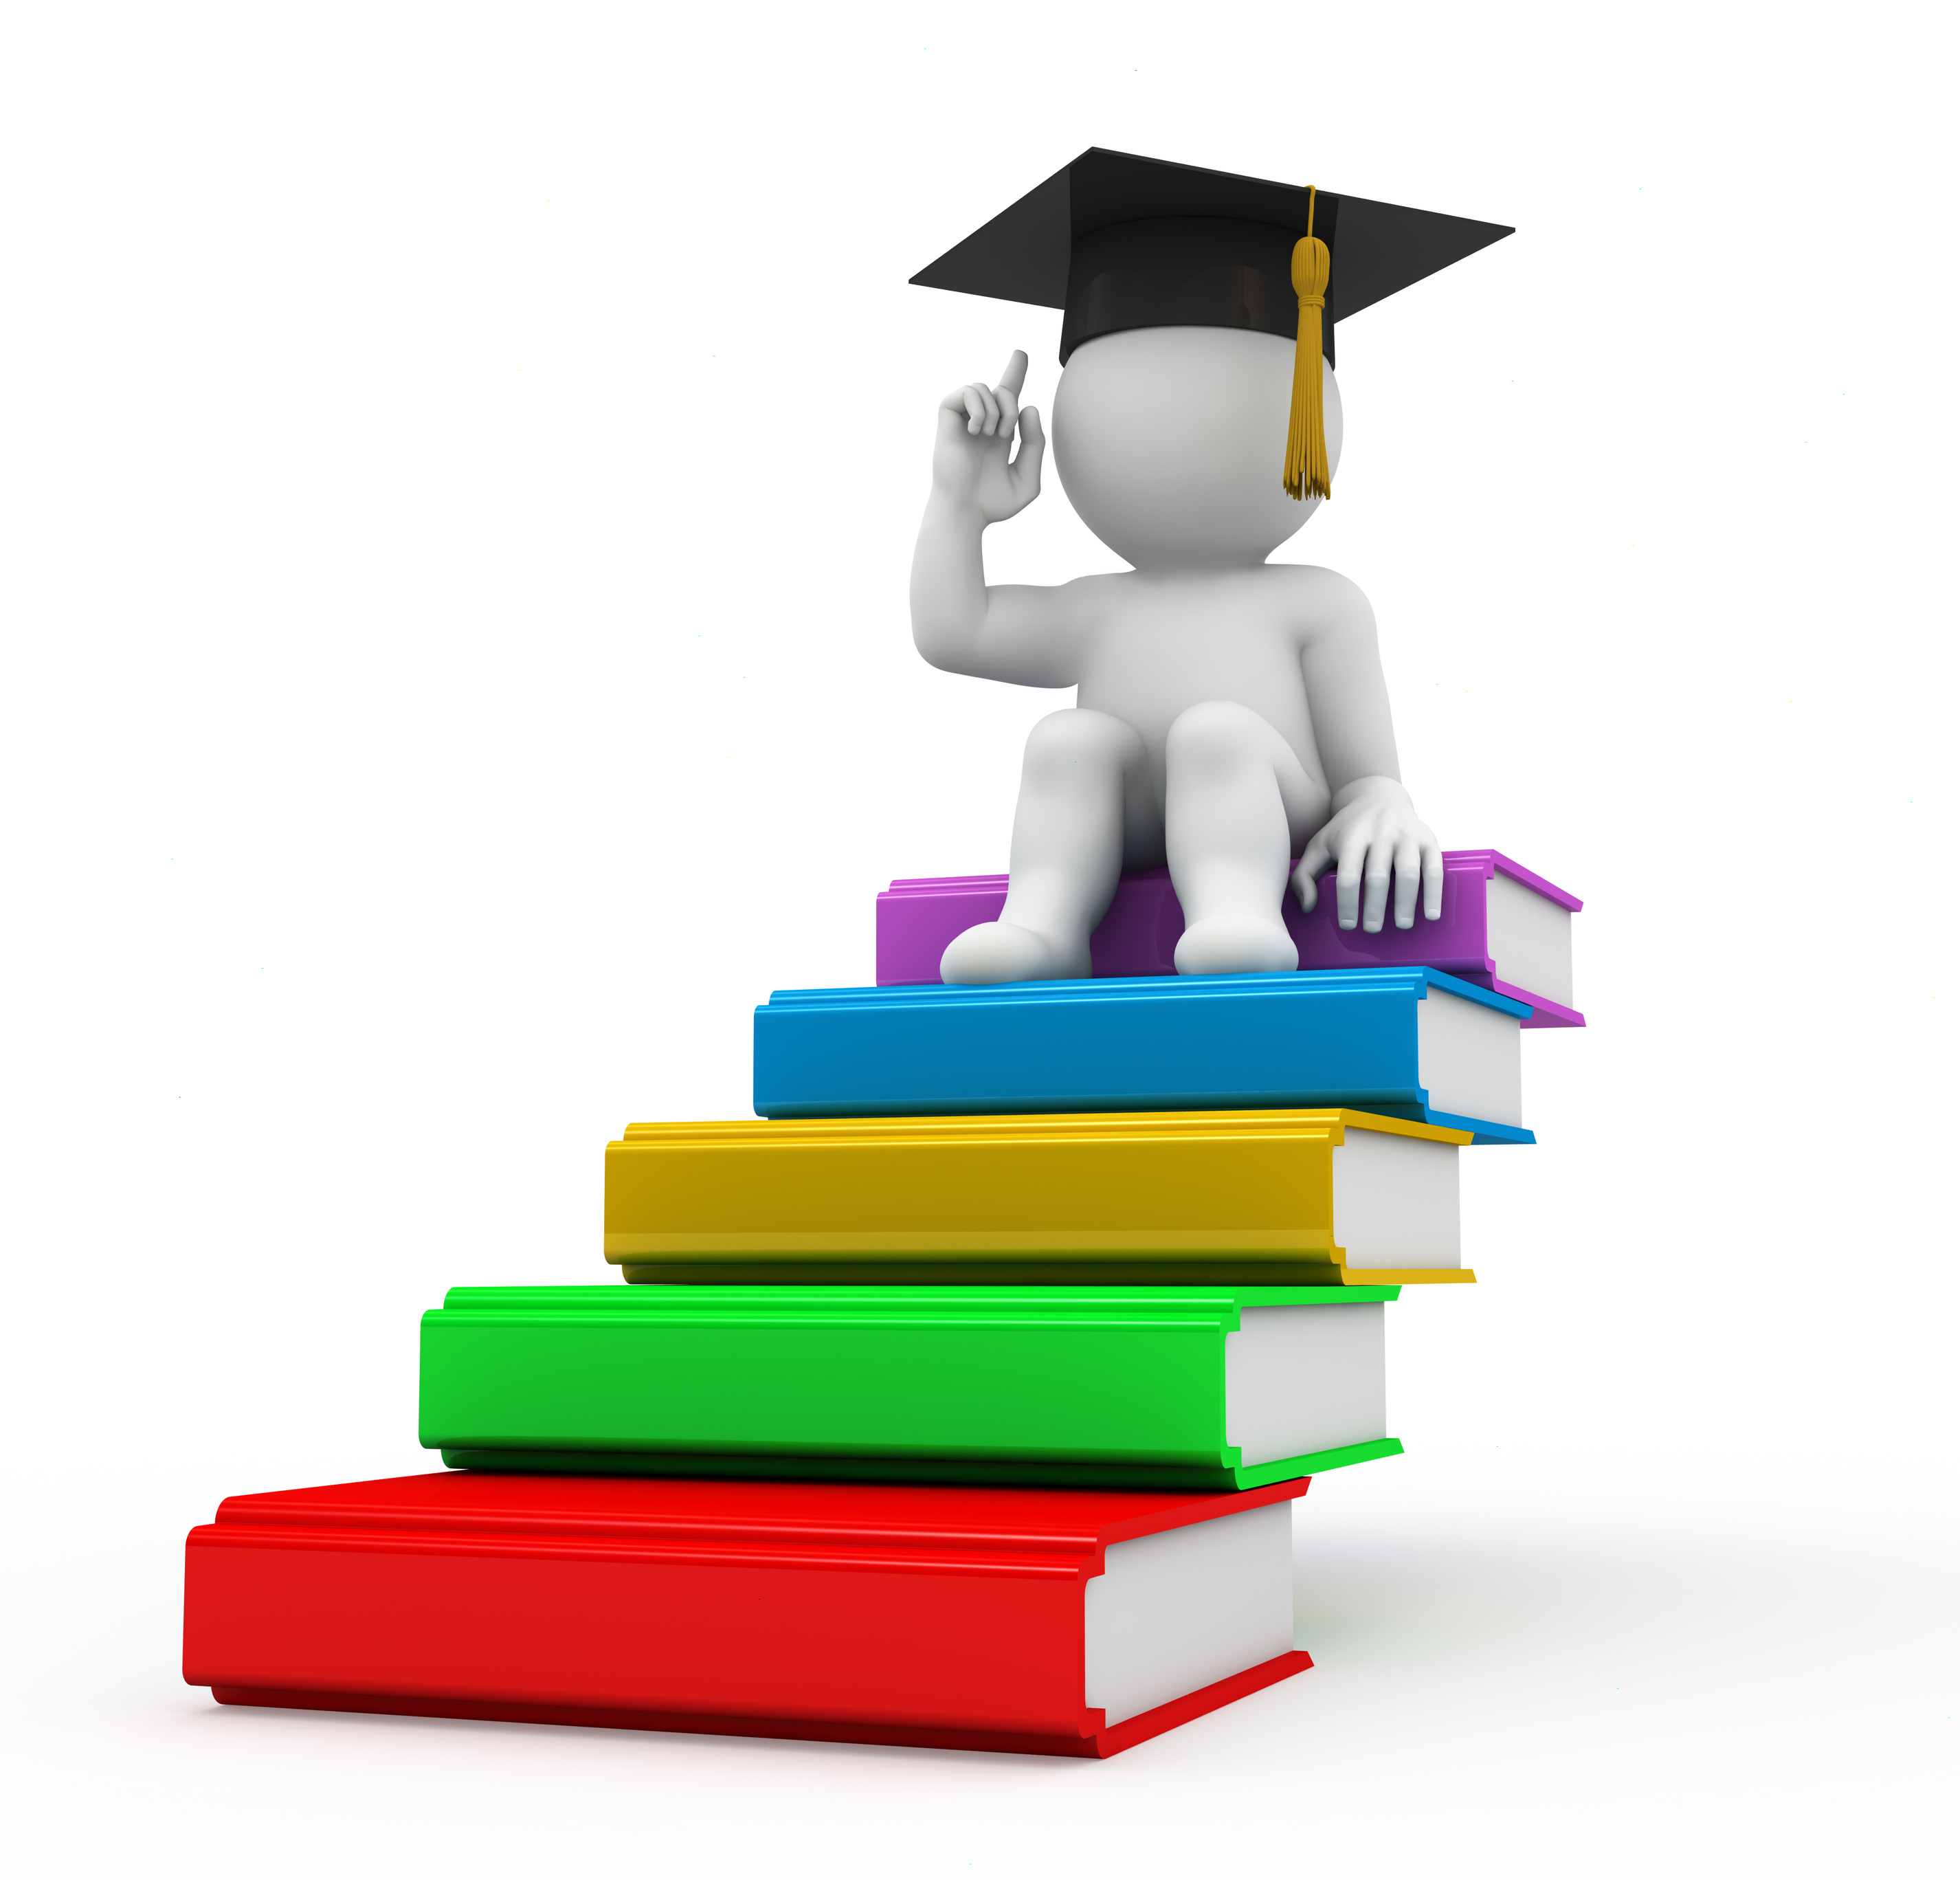 List of topics for dissertation in education